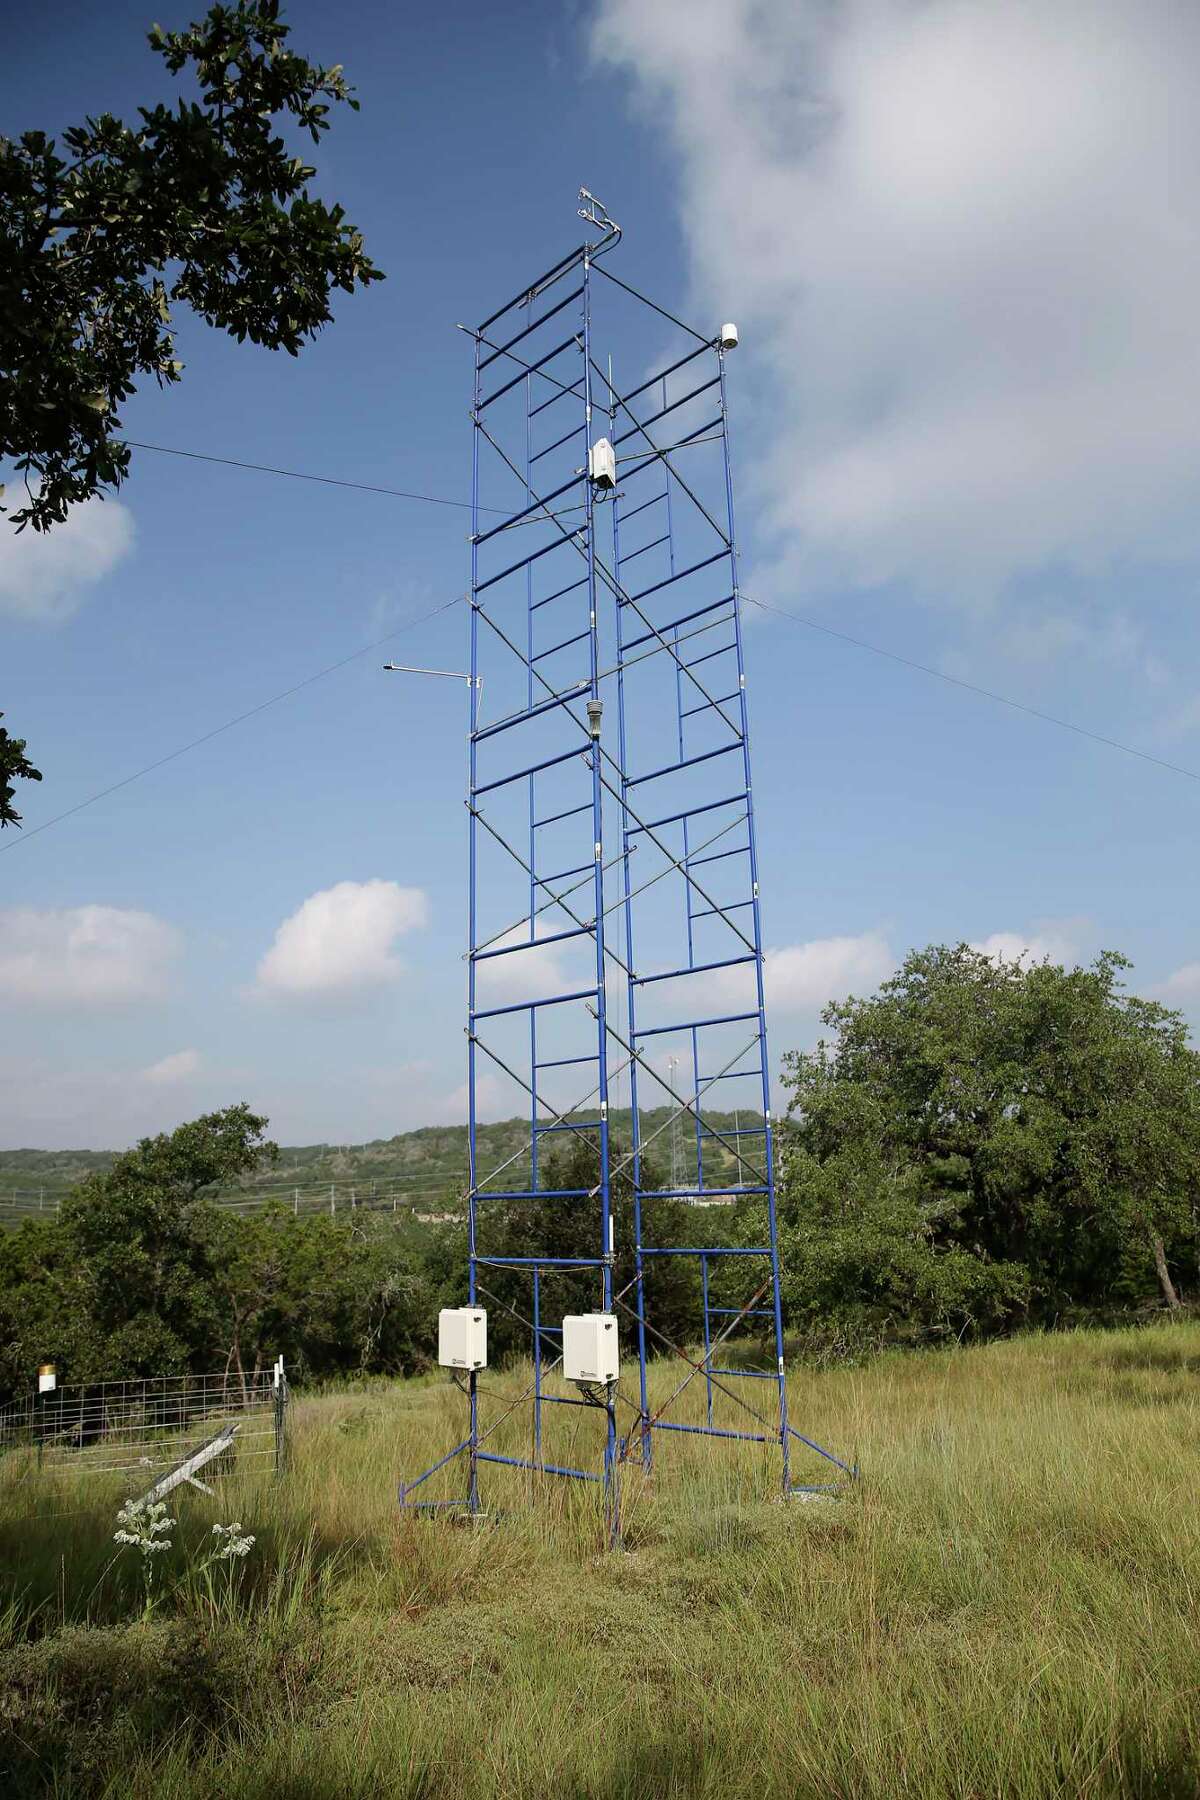 On top of a hill, a tower with instruments measures moister and carbon dioxide in the air at the Edwards Aquifer Conservancy Field Research Park on Wednesday, Sept. 1, 2021.